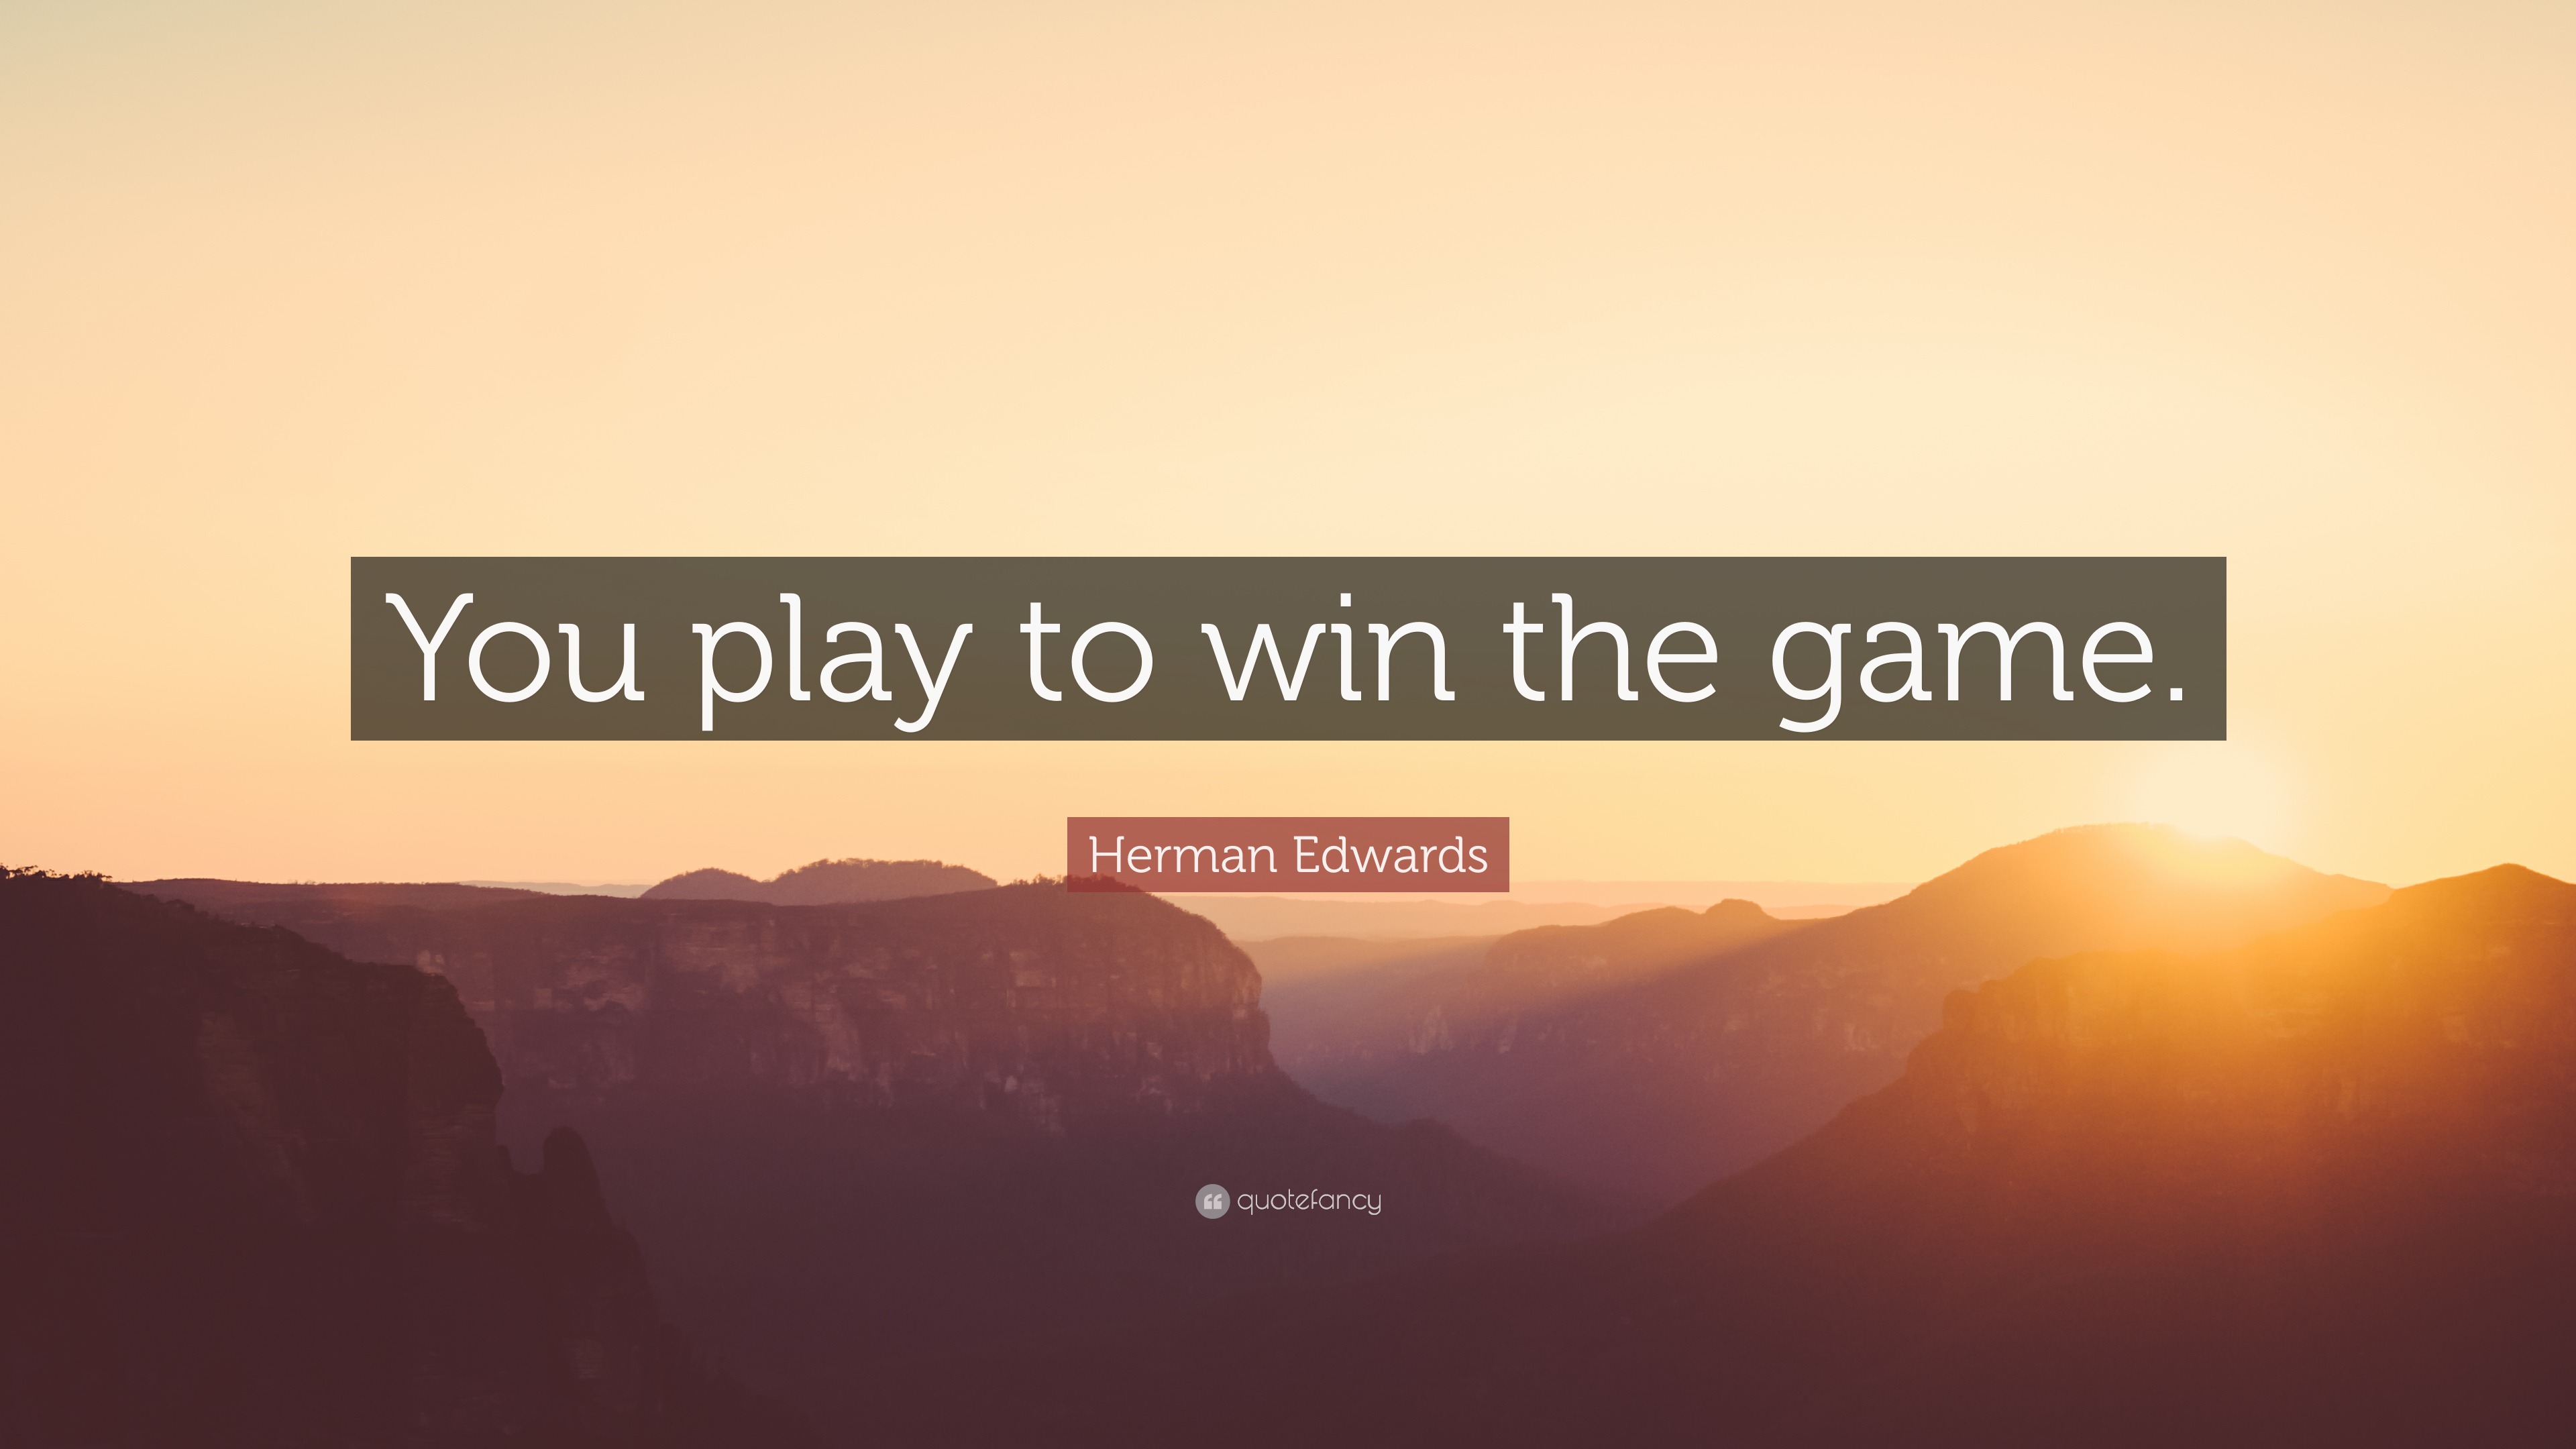 Motivational Wallpaper on Winner: when you play the game of